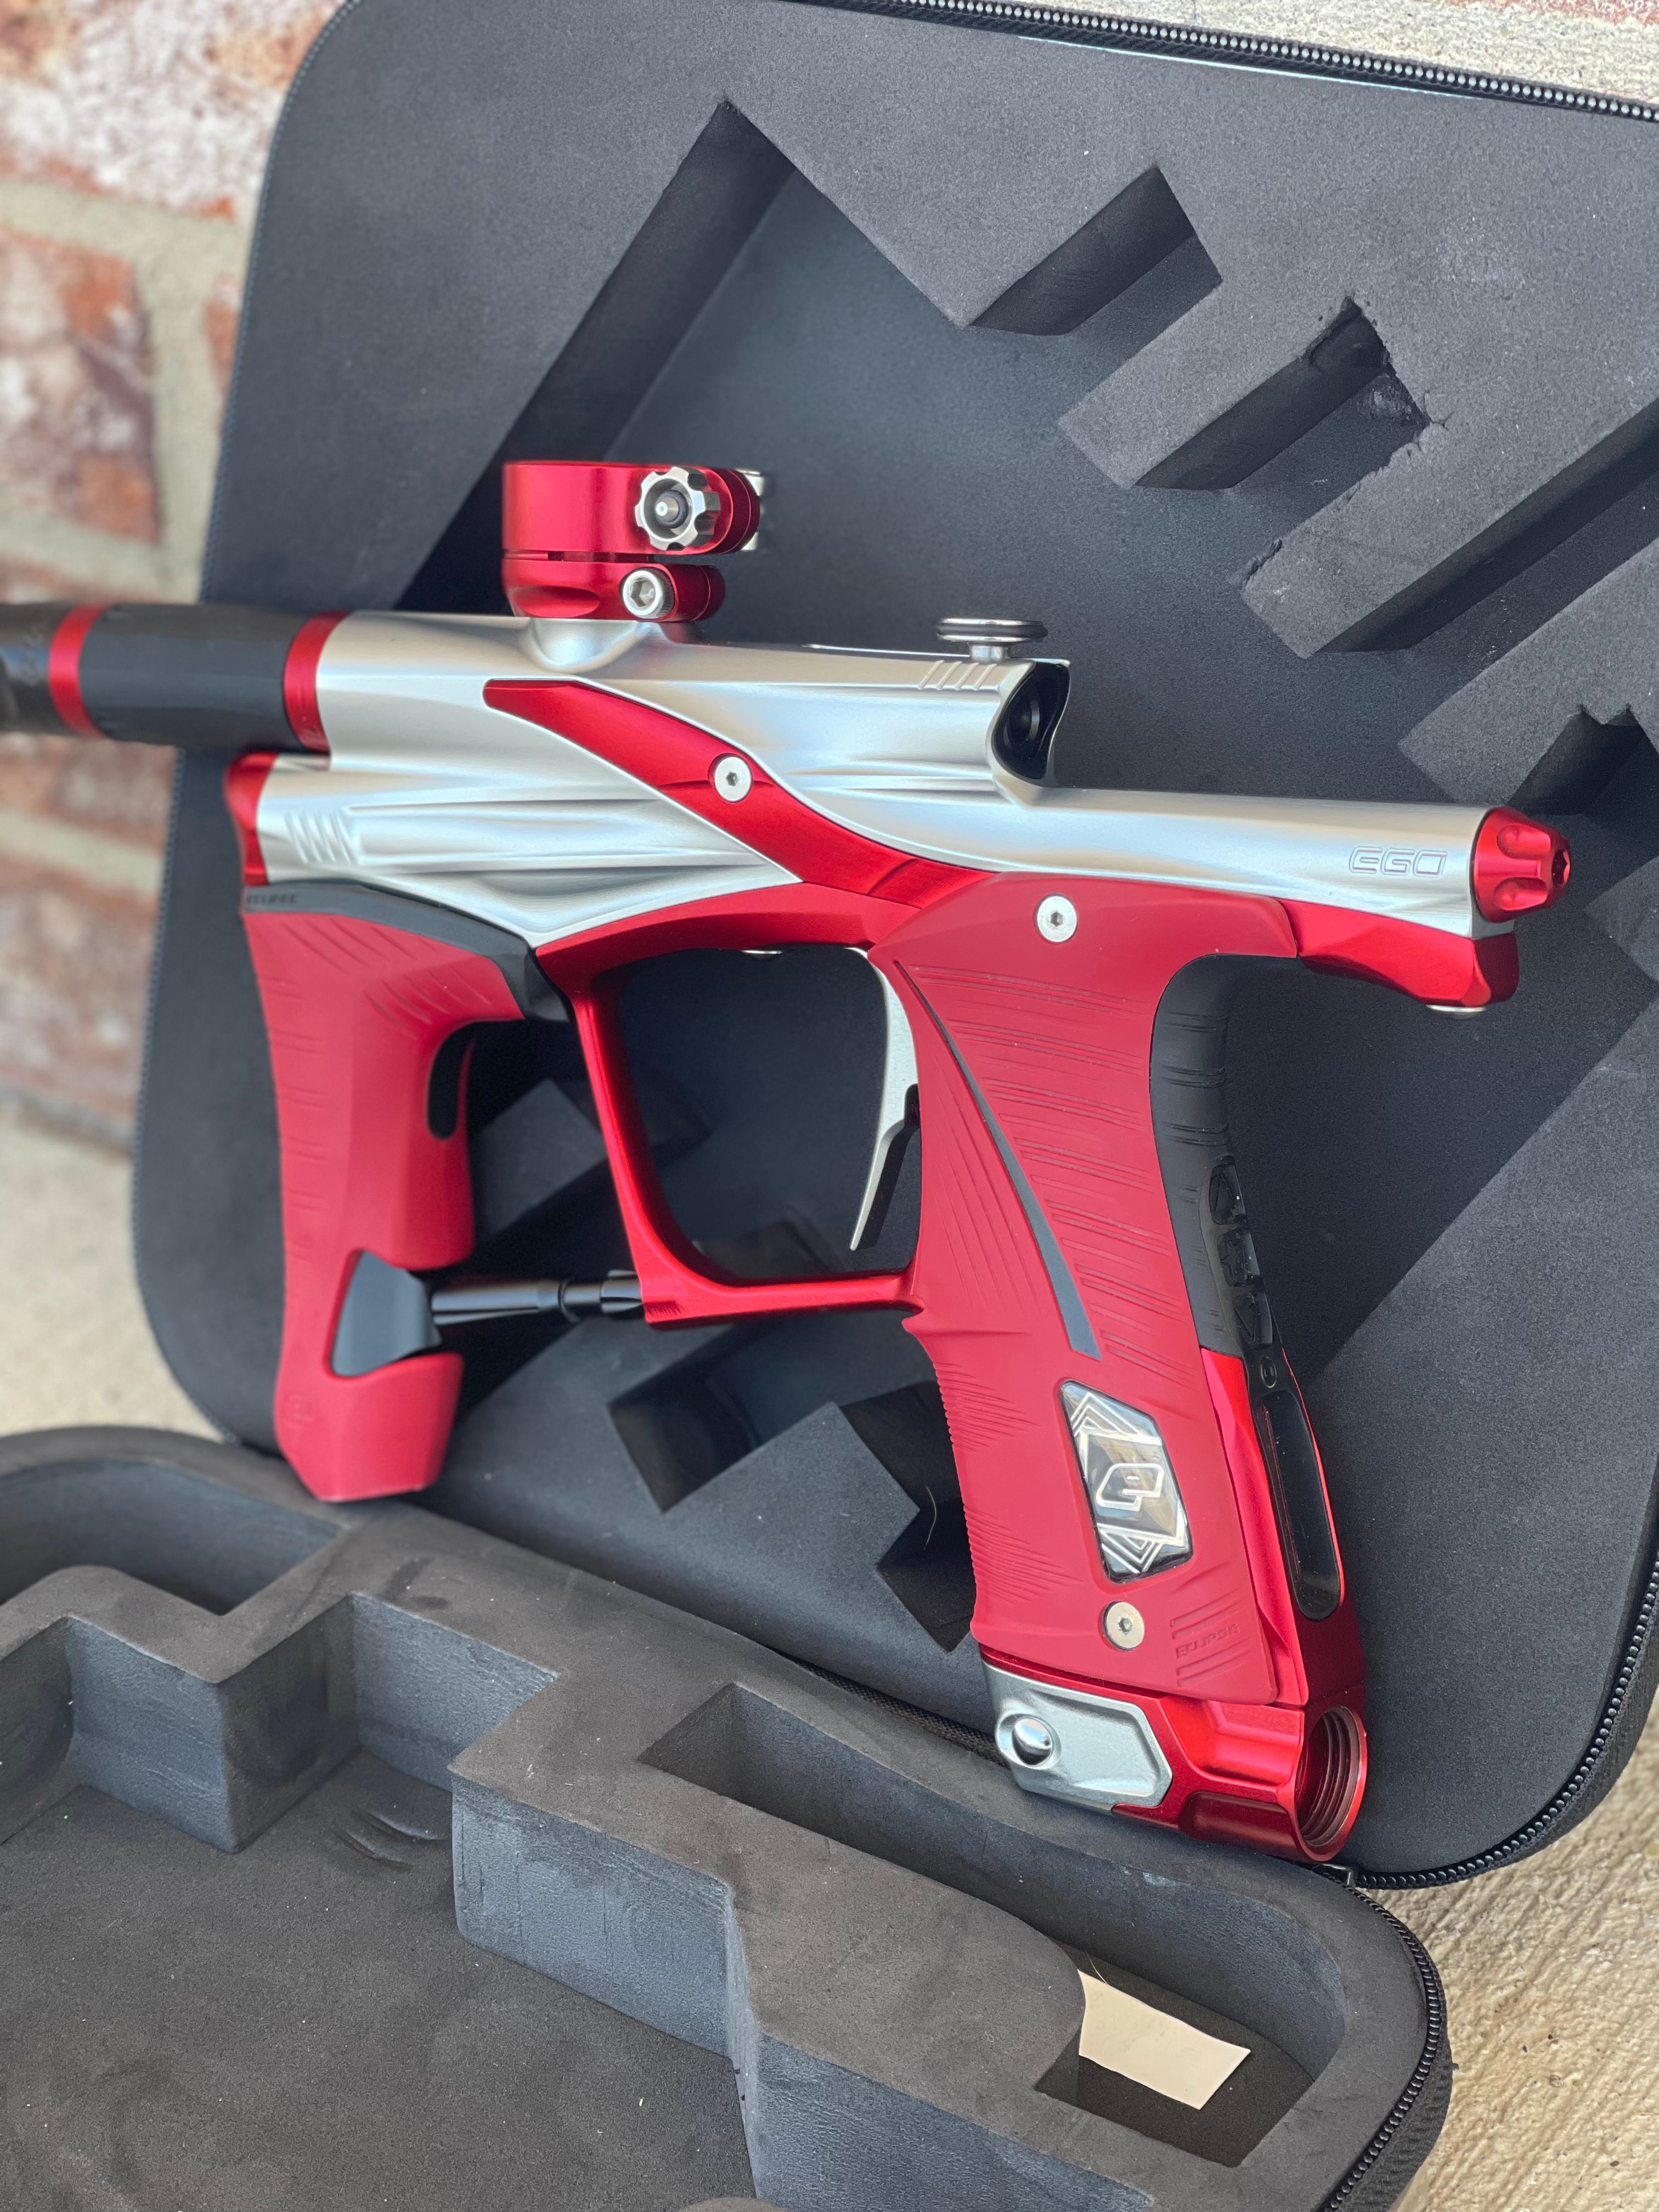 Planet Eclipse Ego LV1.6 Paintball Gun - Silver/Red – Punishers Paintball